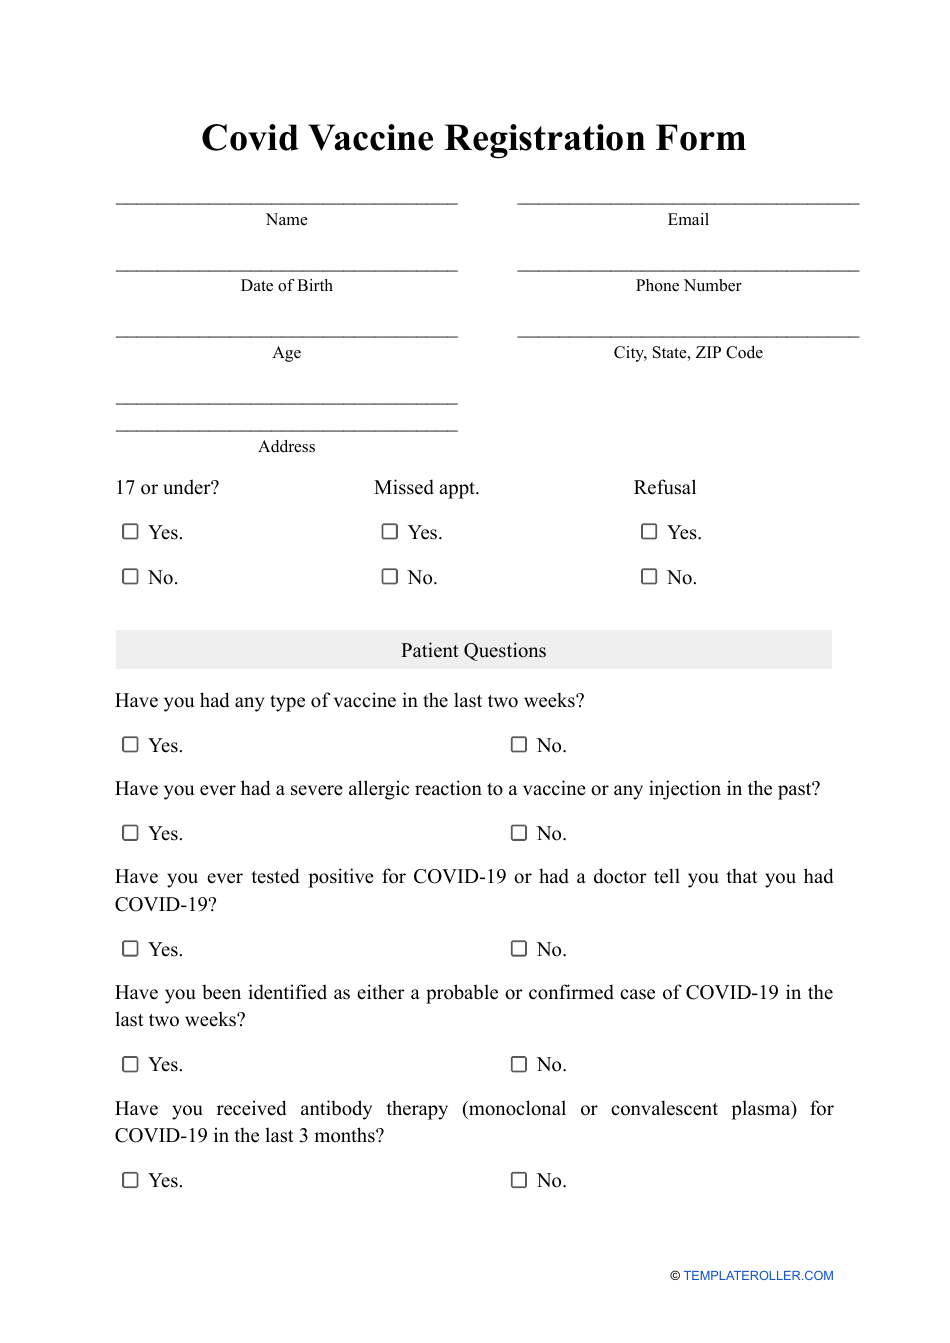 Covid Vaccine Registration Form, Page 1